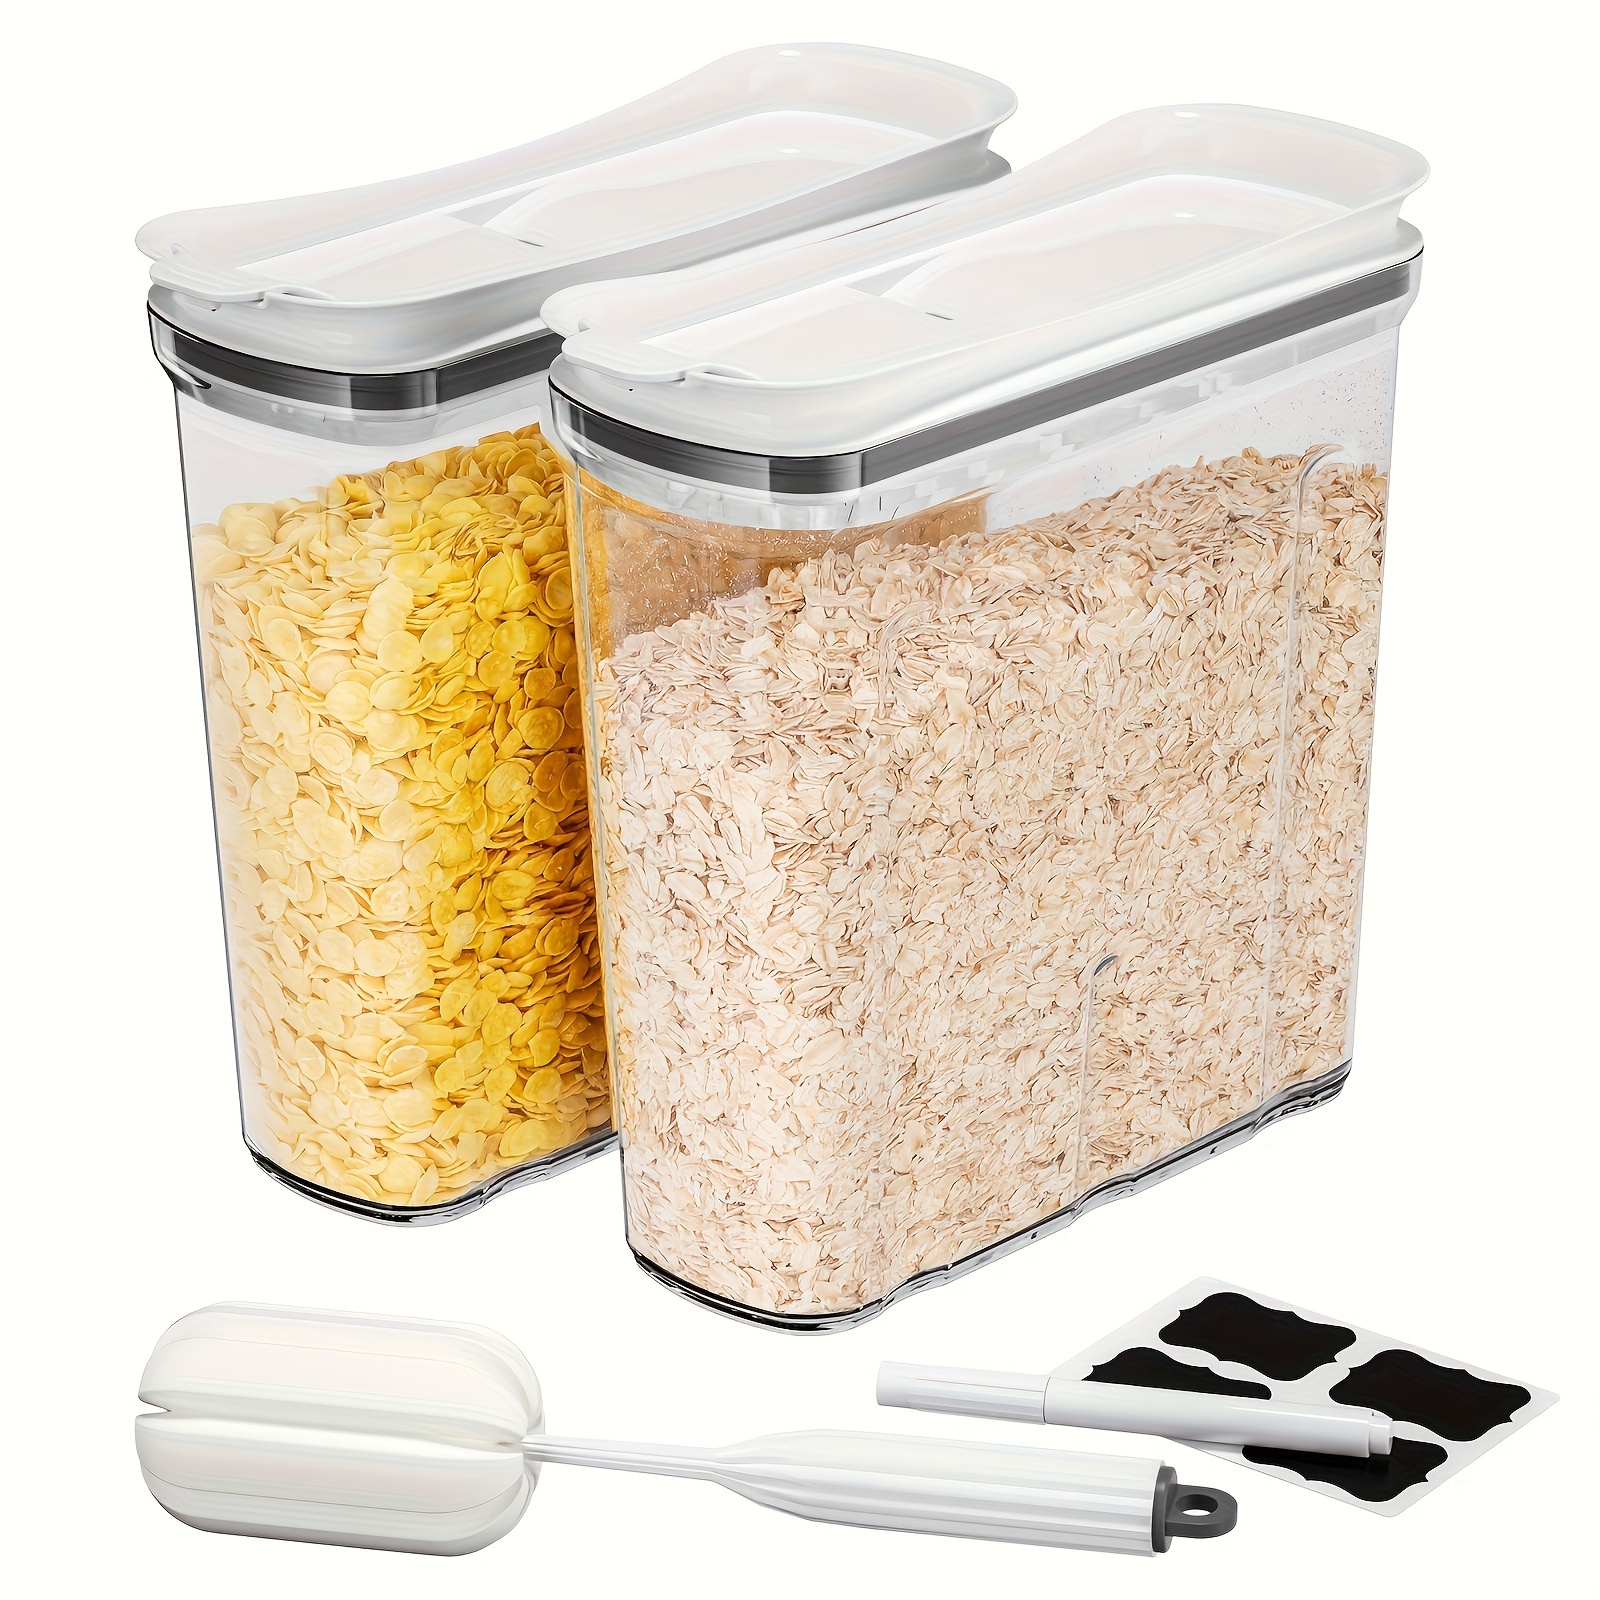 Cereal Containers Storage Set Large - Pack of 3 (4L,135.2 Oz